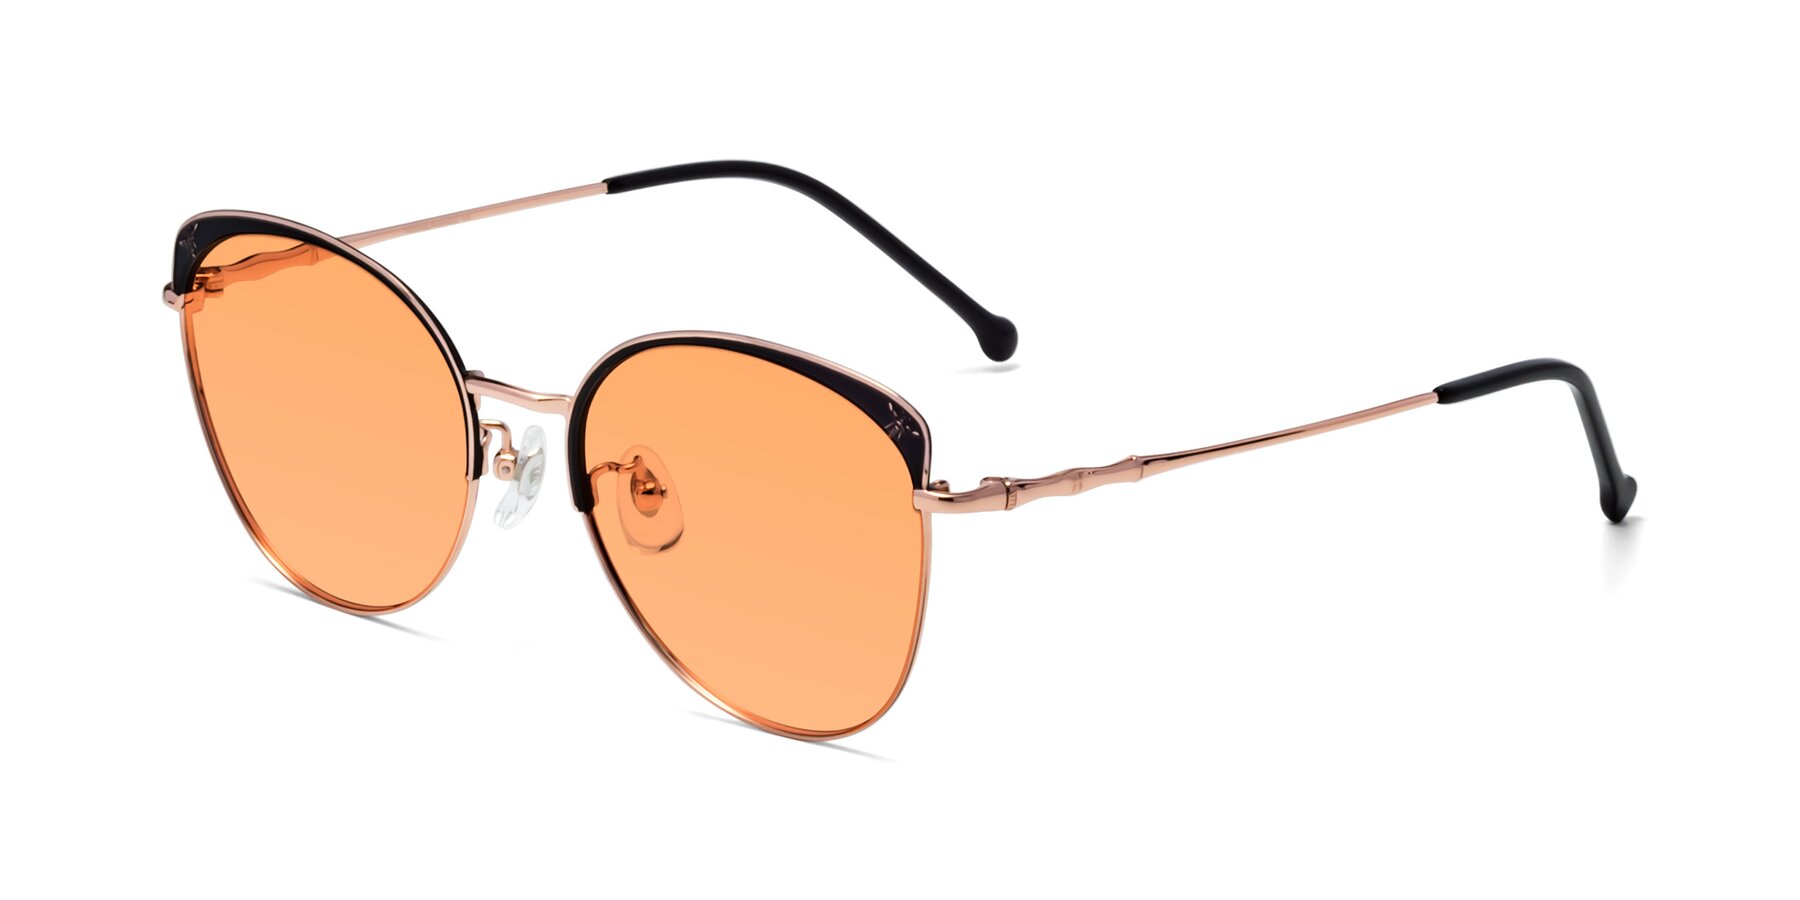 Angle of 18019 in Black-Rose Gold with Medium Orange Tinted Lenses